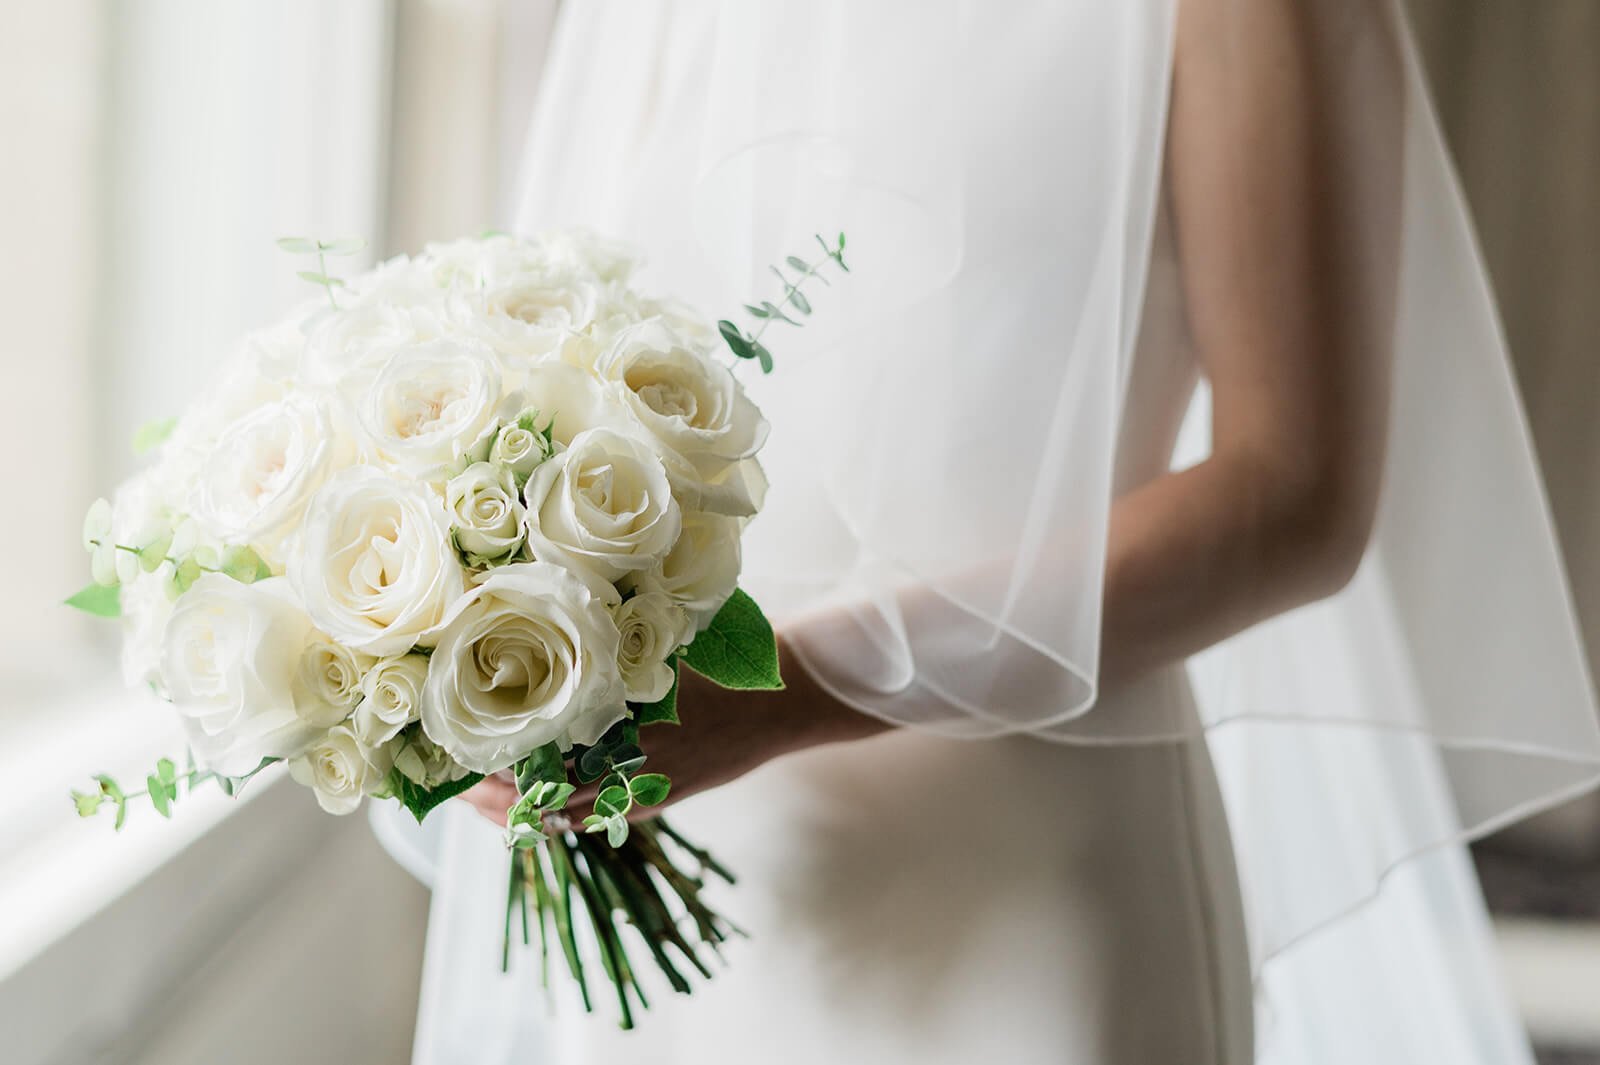 A bridal bouquet filled with ivory roses and eucalyptus by Damselfly Designs